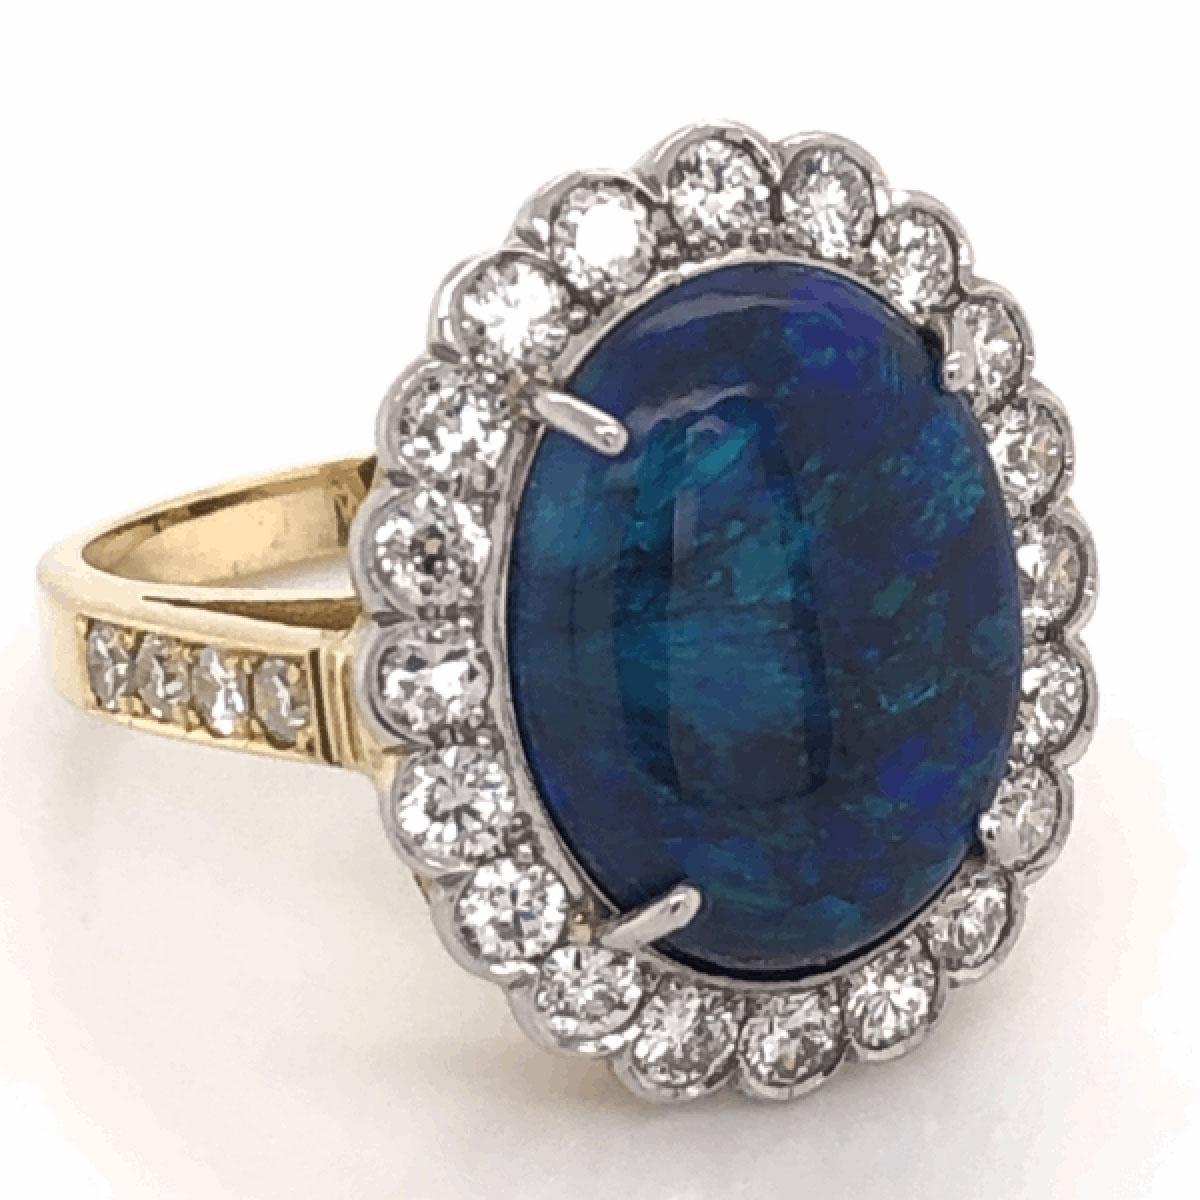 Simply Beautiful! Elegant and finely detailed Solitaire Cocktail Ring, set with a securely nestled 6.00 Carat Black Opal surrounded by Brilliant-cut Diamonds, weighing approx. 1.10 total Carat weight.  Hand crafted in Platinum on 18 Karat Gold. Size